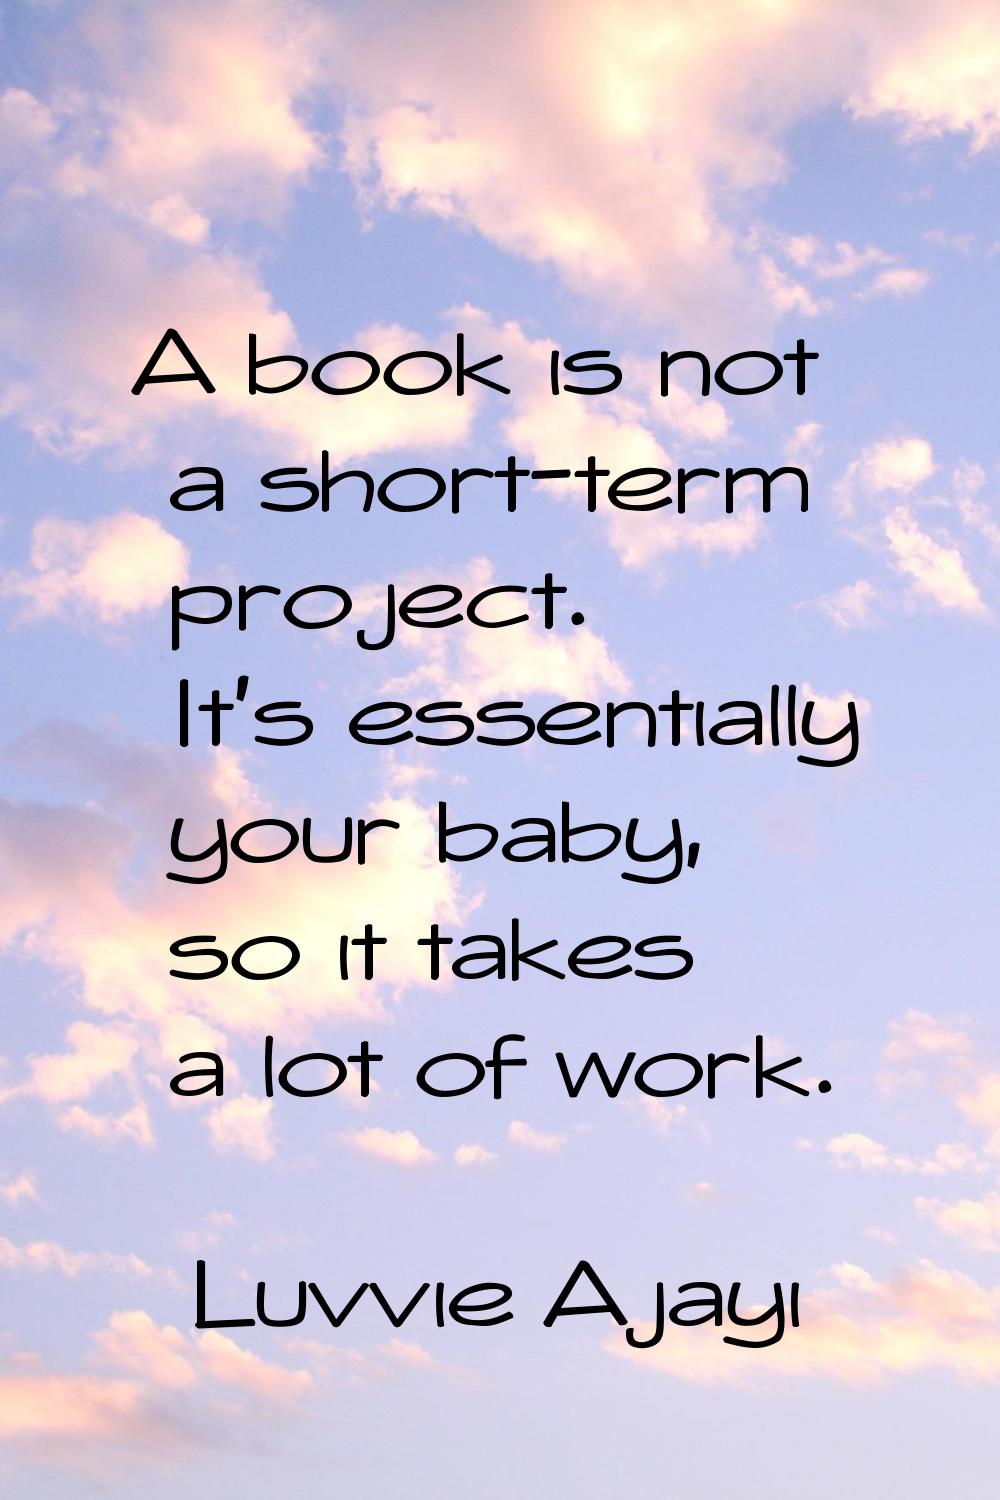 A book is not a short-term project. It's essentially your baby, so it takes a lot of work.